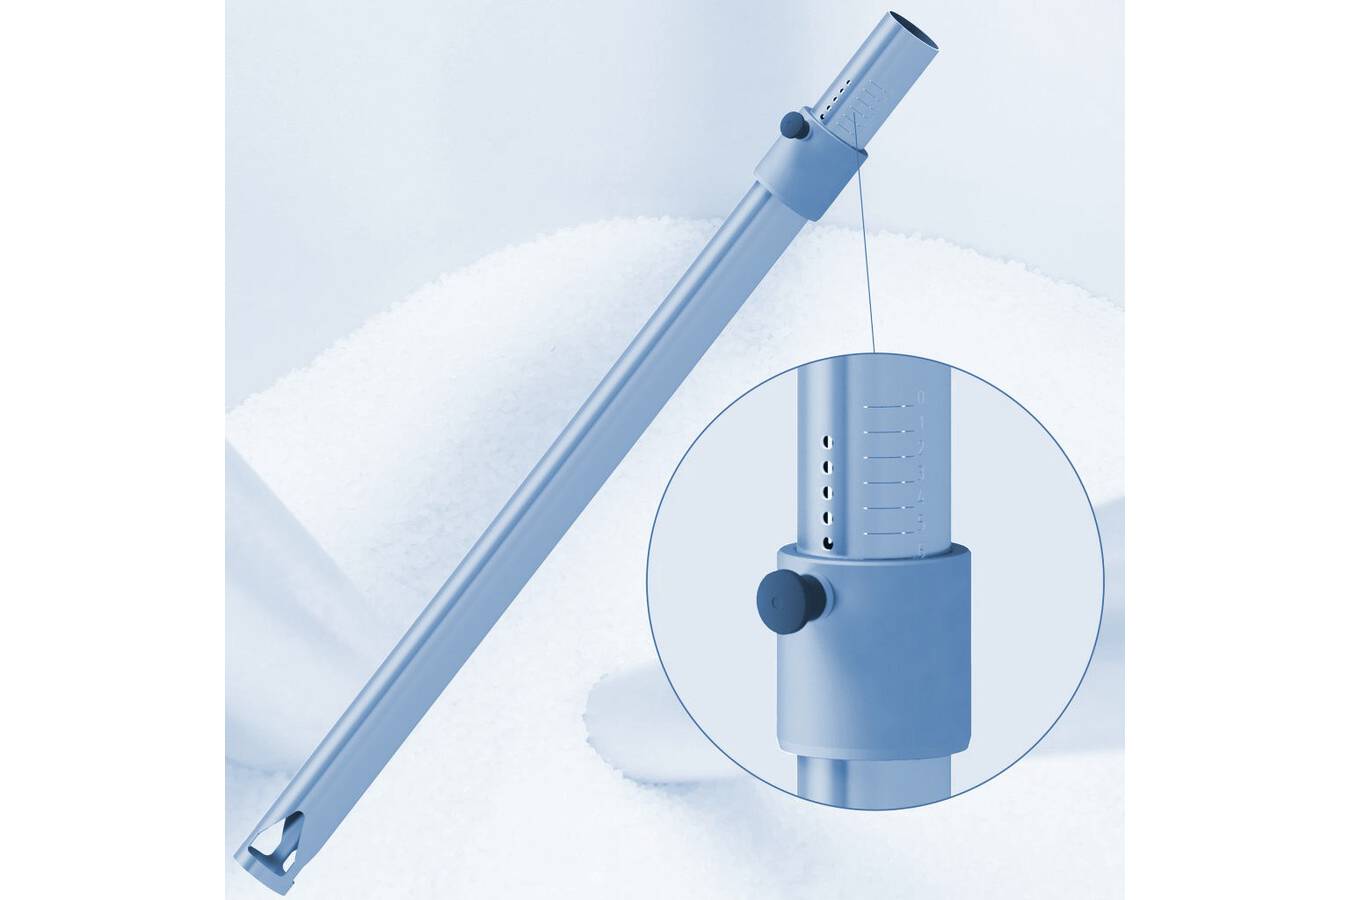 Single-walled suction probe with convenient regulation of intake air Siloanlagen Achberg has designed a user-friendly and powerful suction probe with gradual regulation of the suction air, to ensure the proper solids to air ratio for pneumatic conveying.